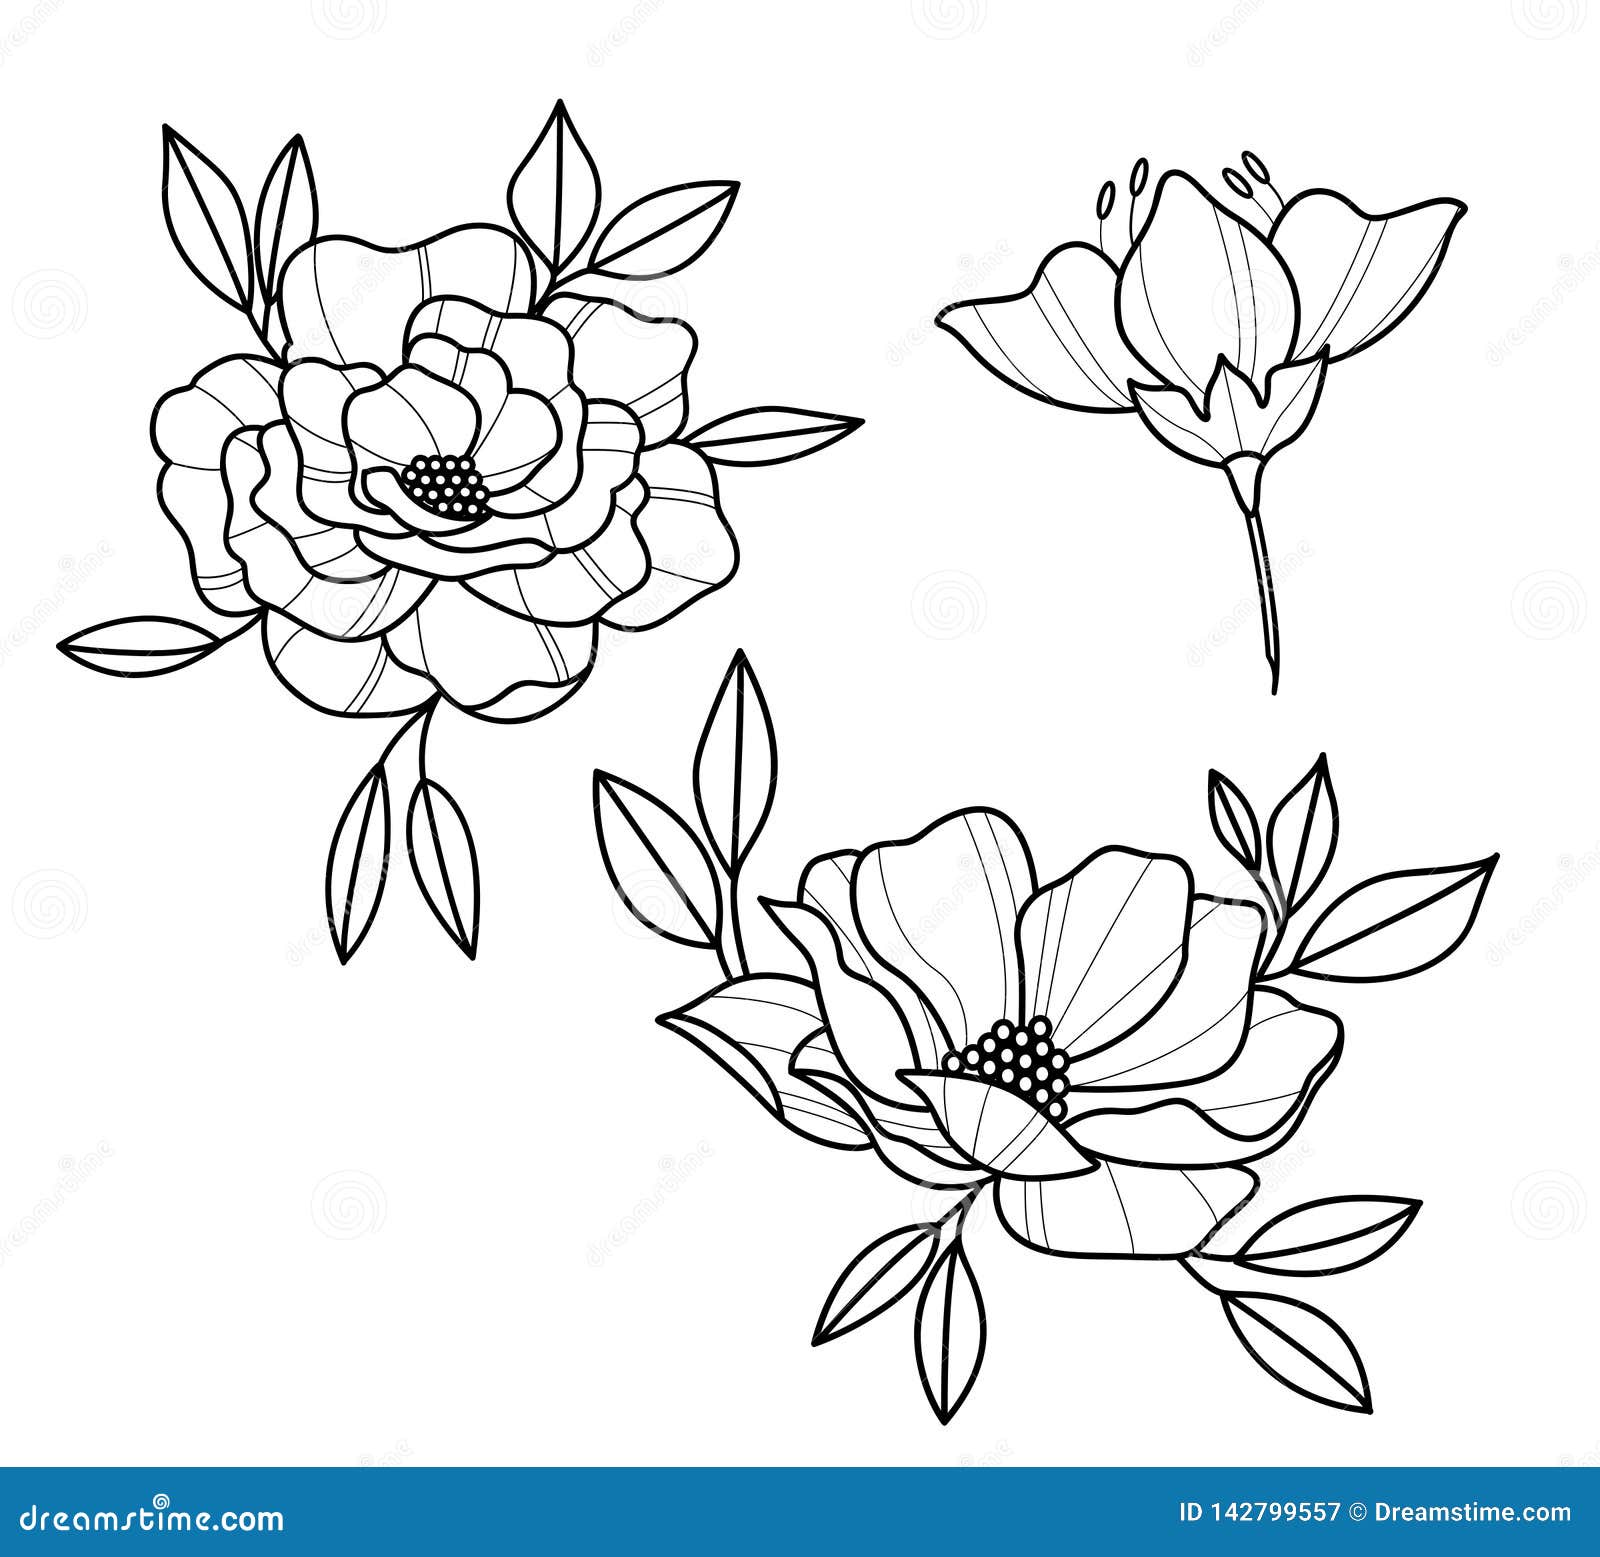 FLASH DAY TOMORROW Doors open 12 Some dainty lil flowers for those of you  wanting something sweet  small Tag ya  Tattoo designs Tattoos Floral  tattoo design